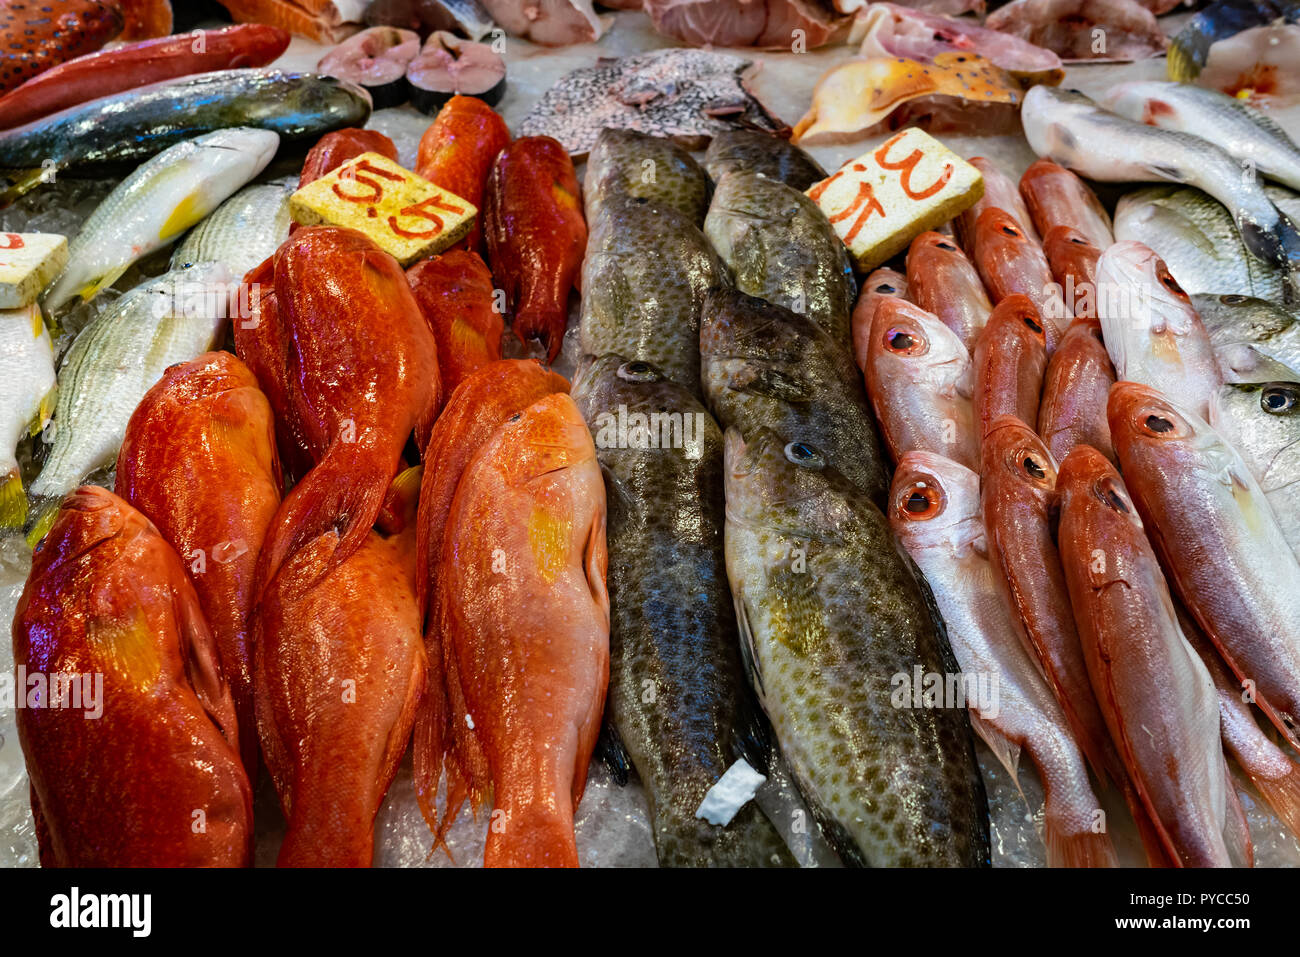 Fish on sale at a wet market in Hong Kong Stock Photo